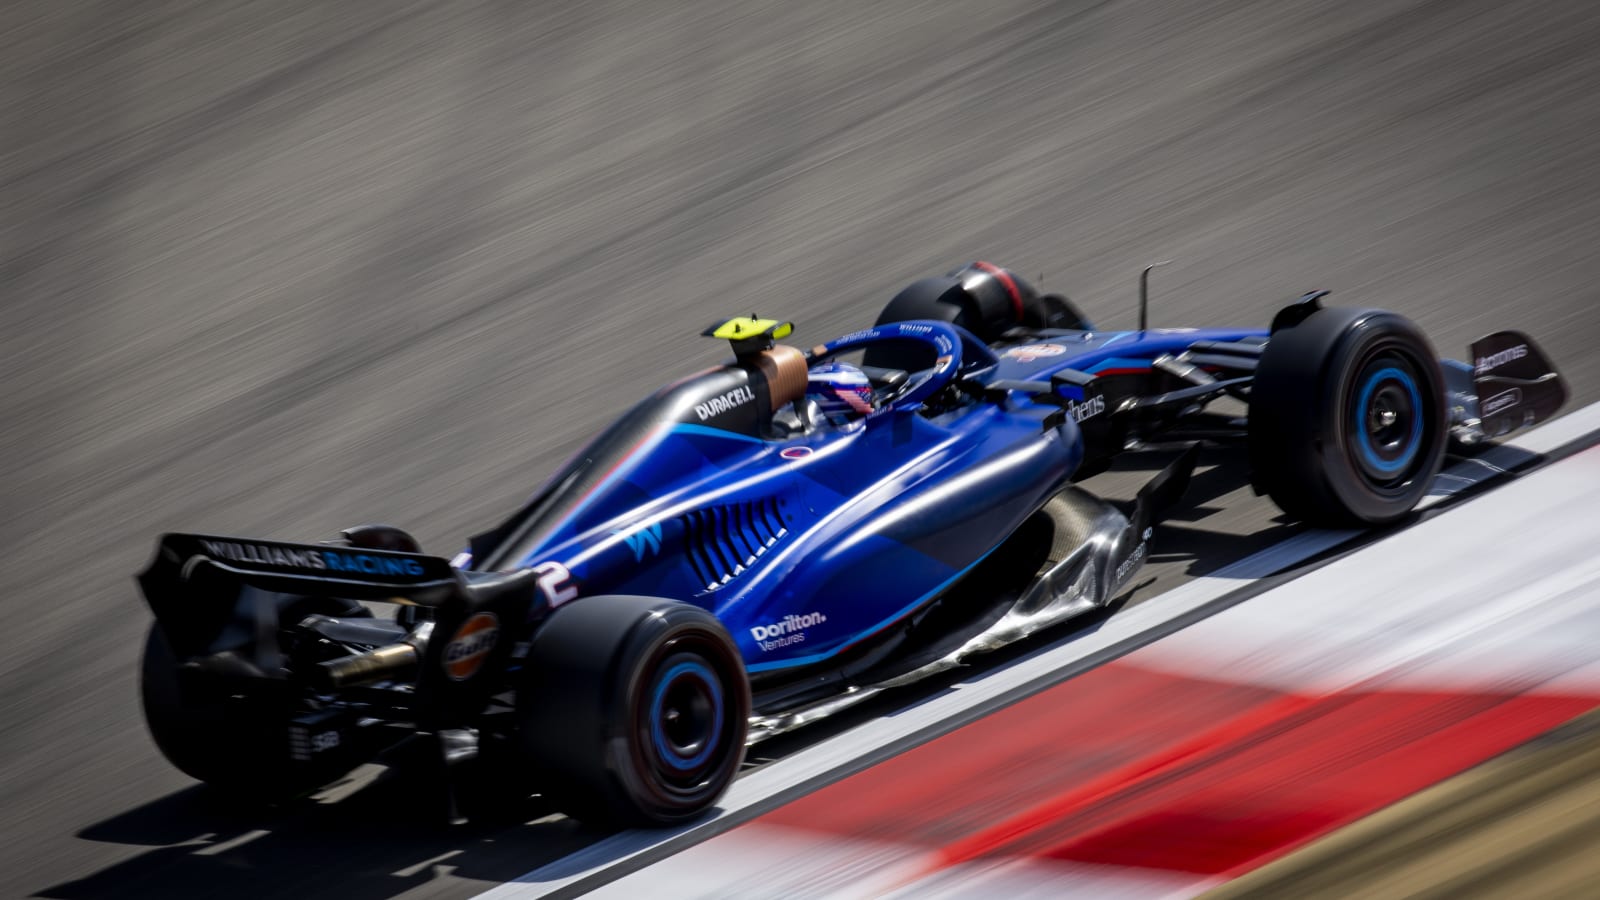 BAHRAIN - Logan Sargent (Williams) during the second day of testing at Bahrain International Circuit ahead of the start of the Formula 1 season.  ANP SEM VAN DER WAL (Photo by ANP via Getty Images)